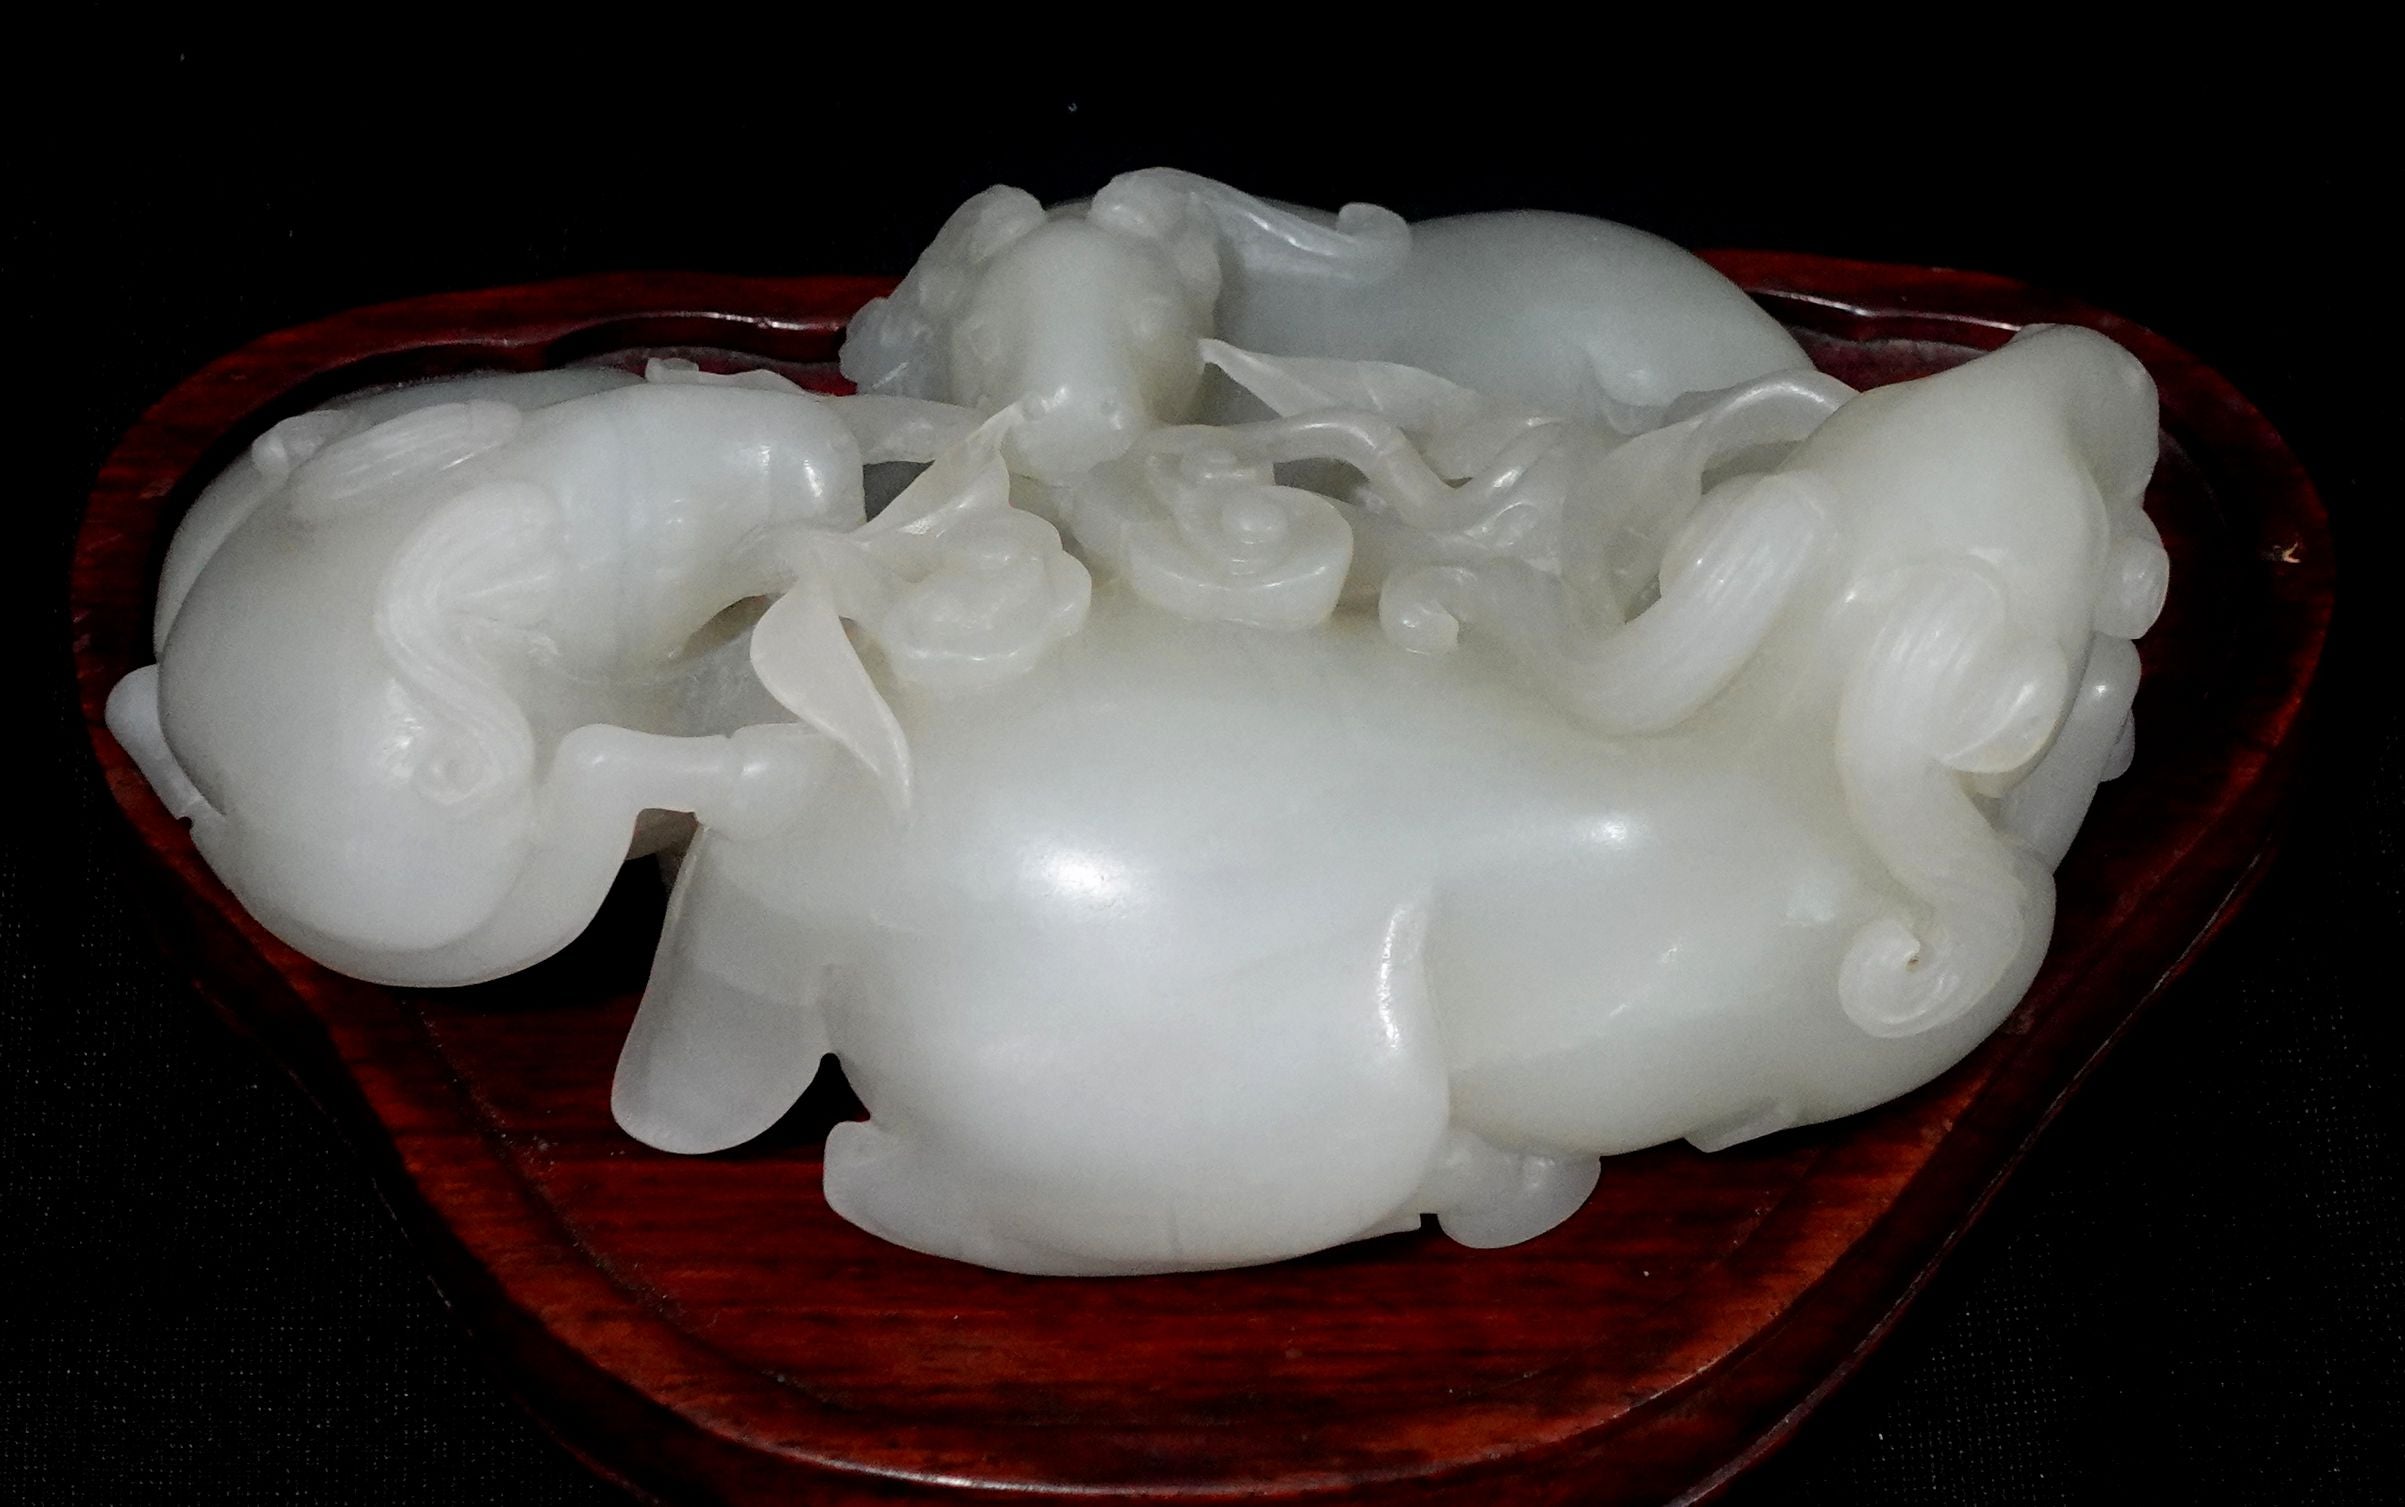 A nice hand-carved antique, a Large and Heavy Chinese Hetain White- Light Gray Jade of 3 Rams resting on the  wooden stand., 360° carving. There is a meaning behind this artwork. Three Rams read 